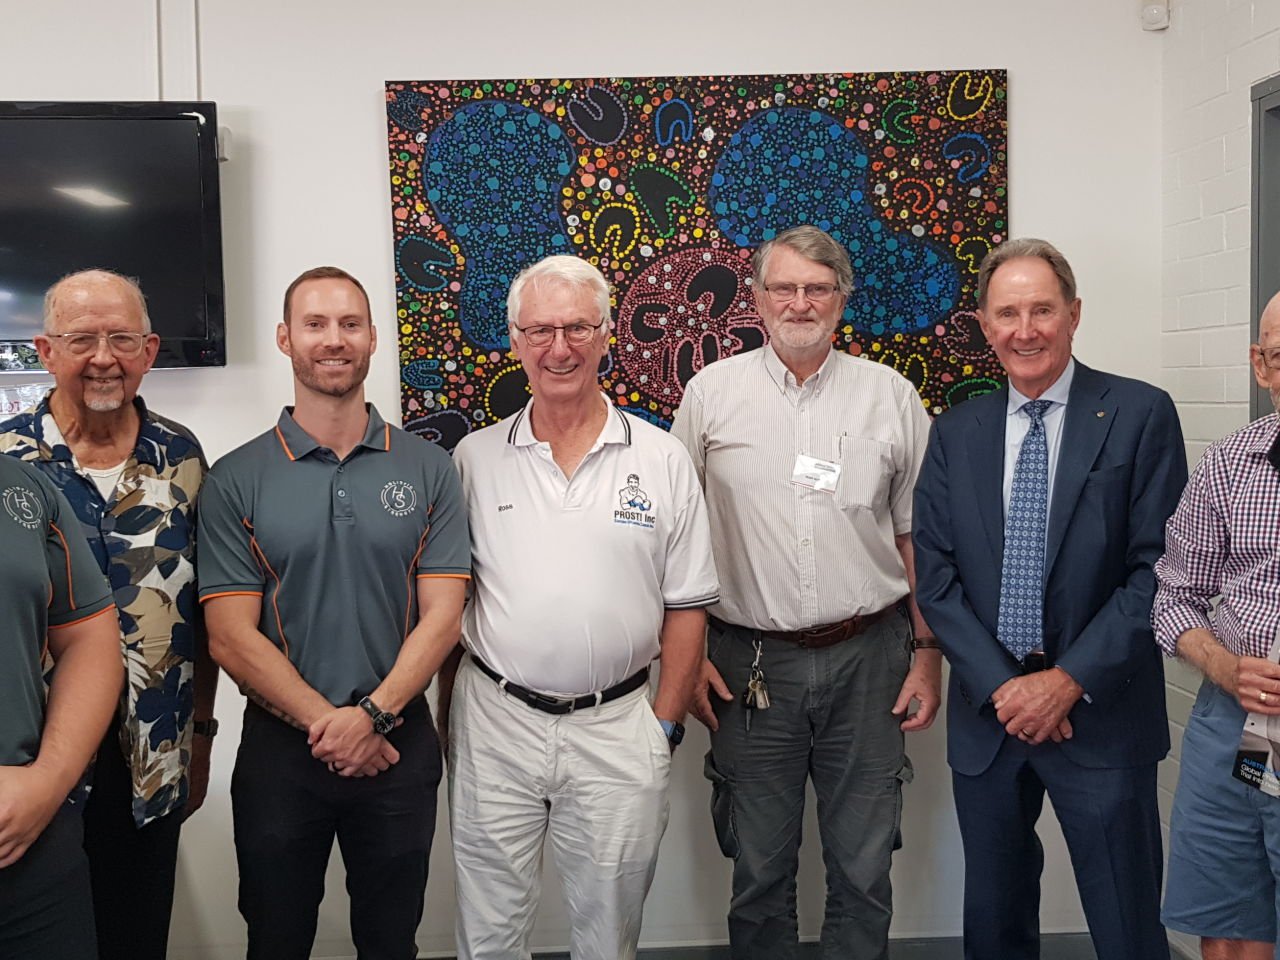 Zac Prince & Vian Botma, Exercise Physiologists, Ross Campbell, Member PROST and Jeff Leach, Chairman of PROST with Terry Flanagan, Terry Quinn and Curtis Clark following their guest presentation on Prostate Cancer